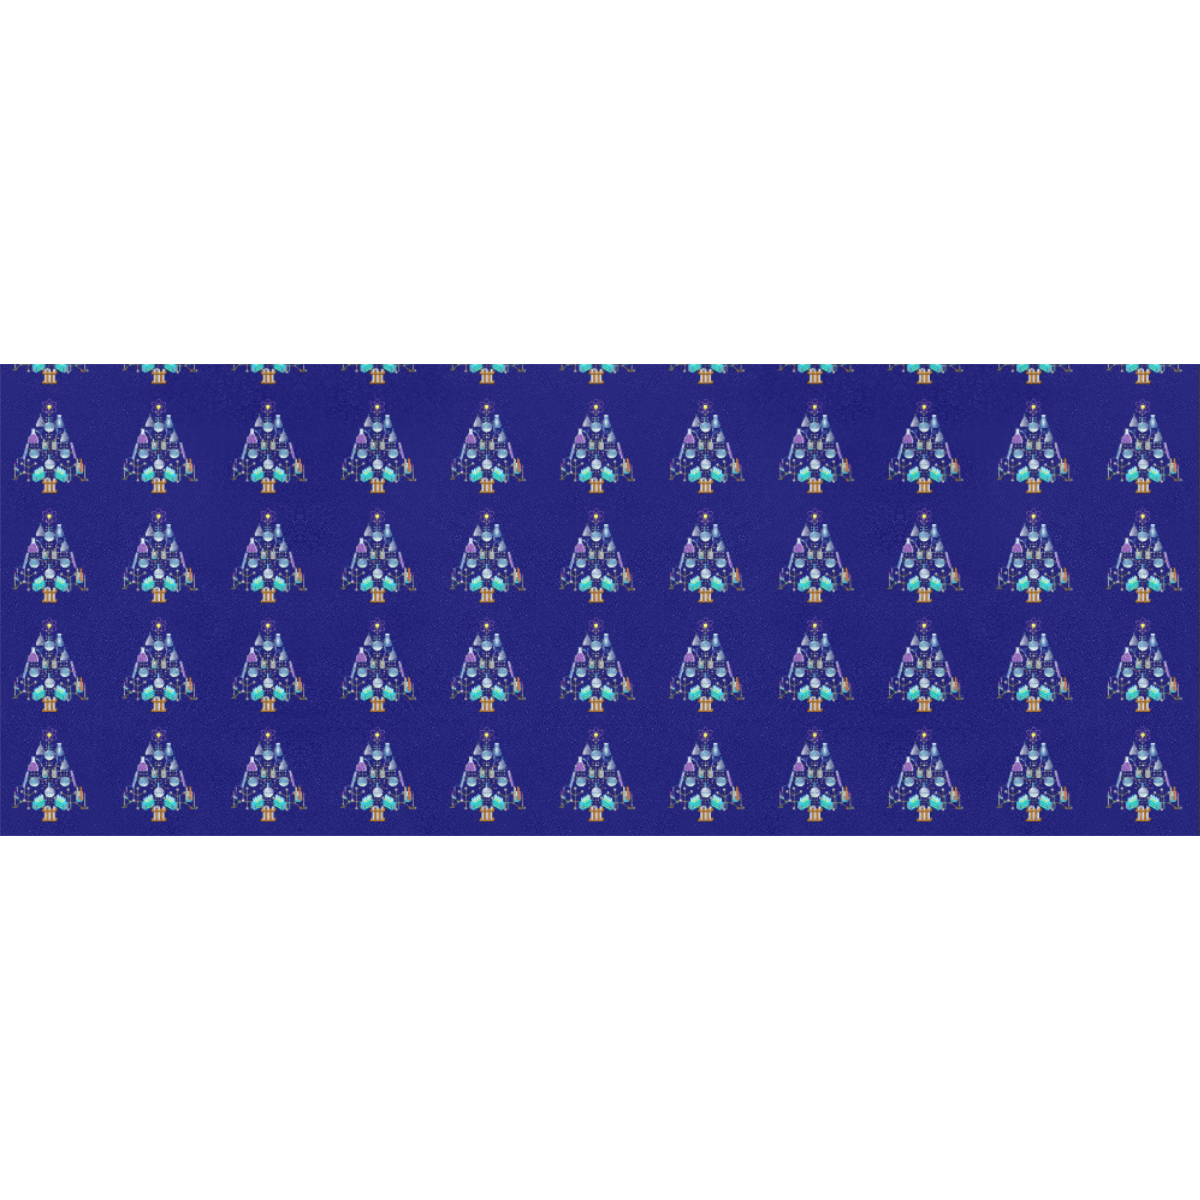 Oh Chemist Tree, Oh Chemistry, Science Christmas on Blue Gift Wrapping Paper 58"x 23" (3 Rolls)